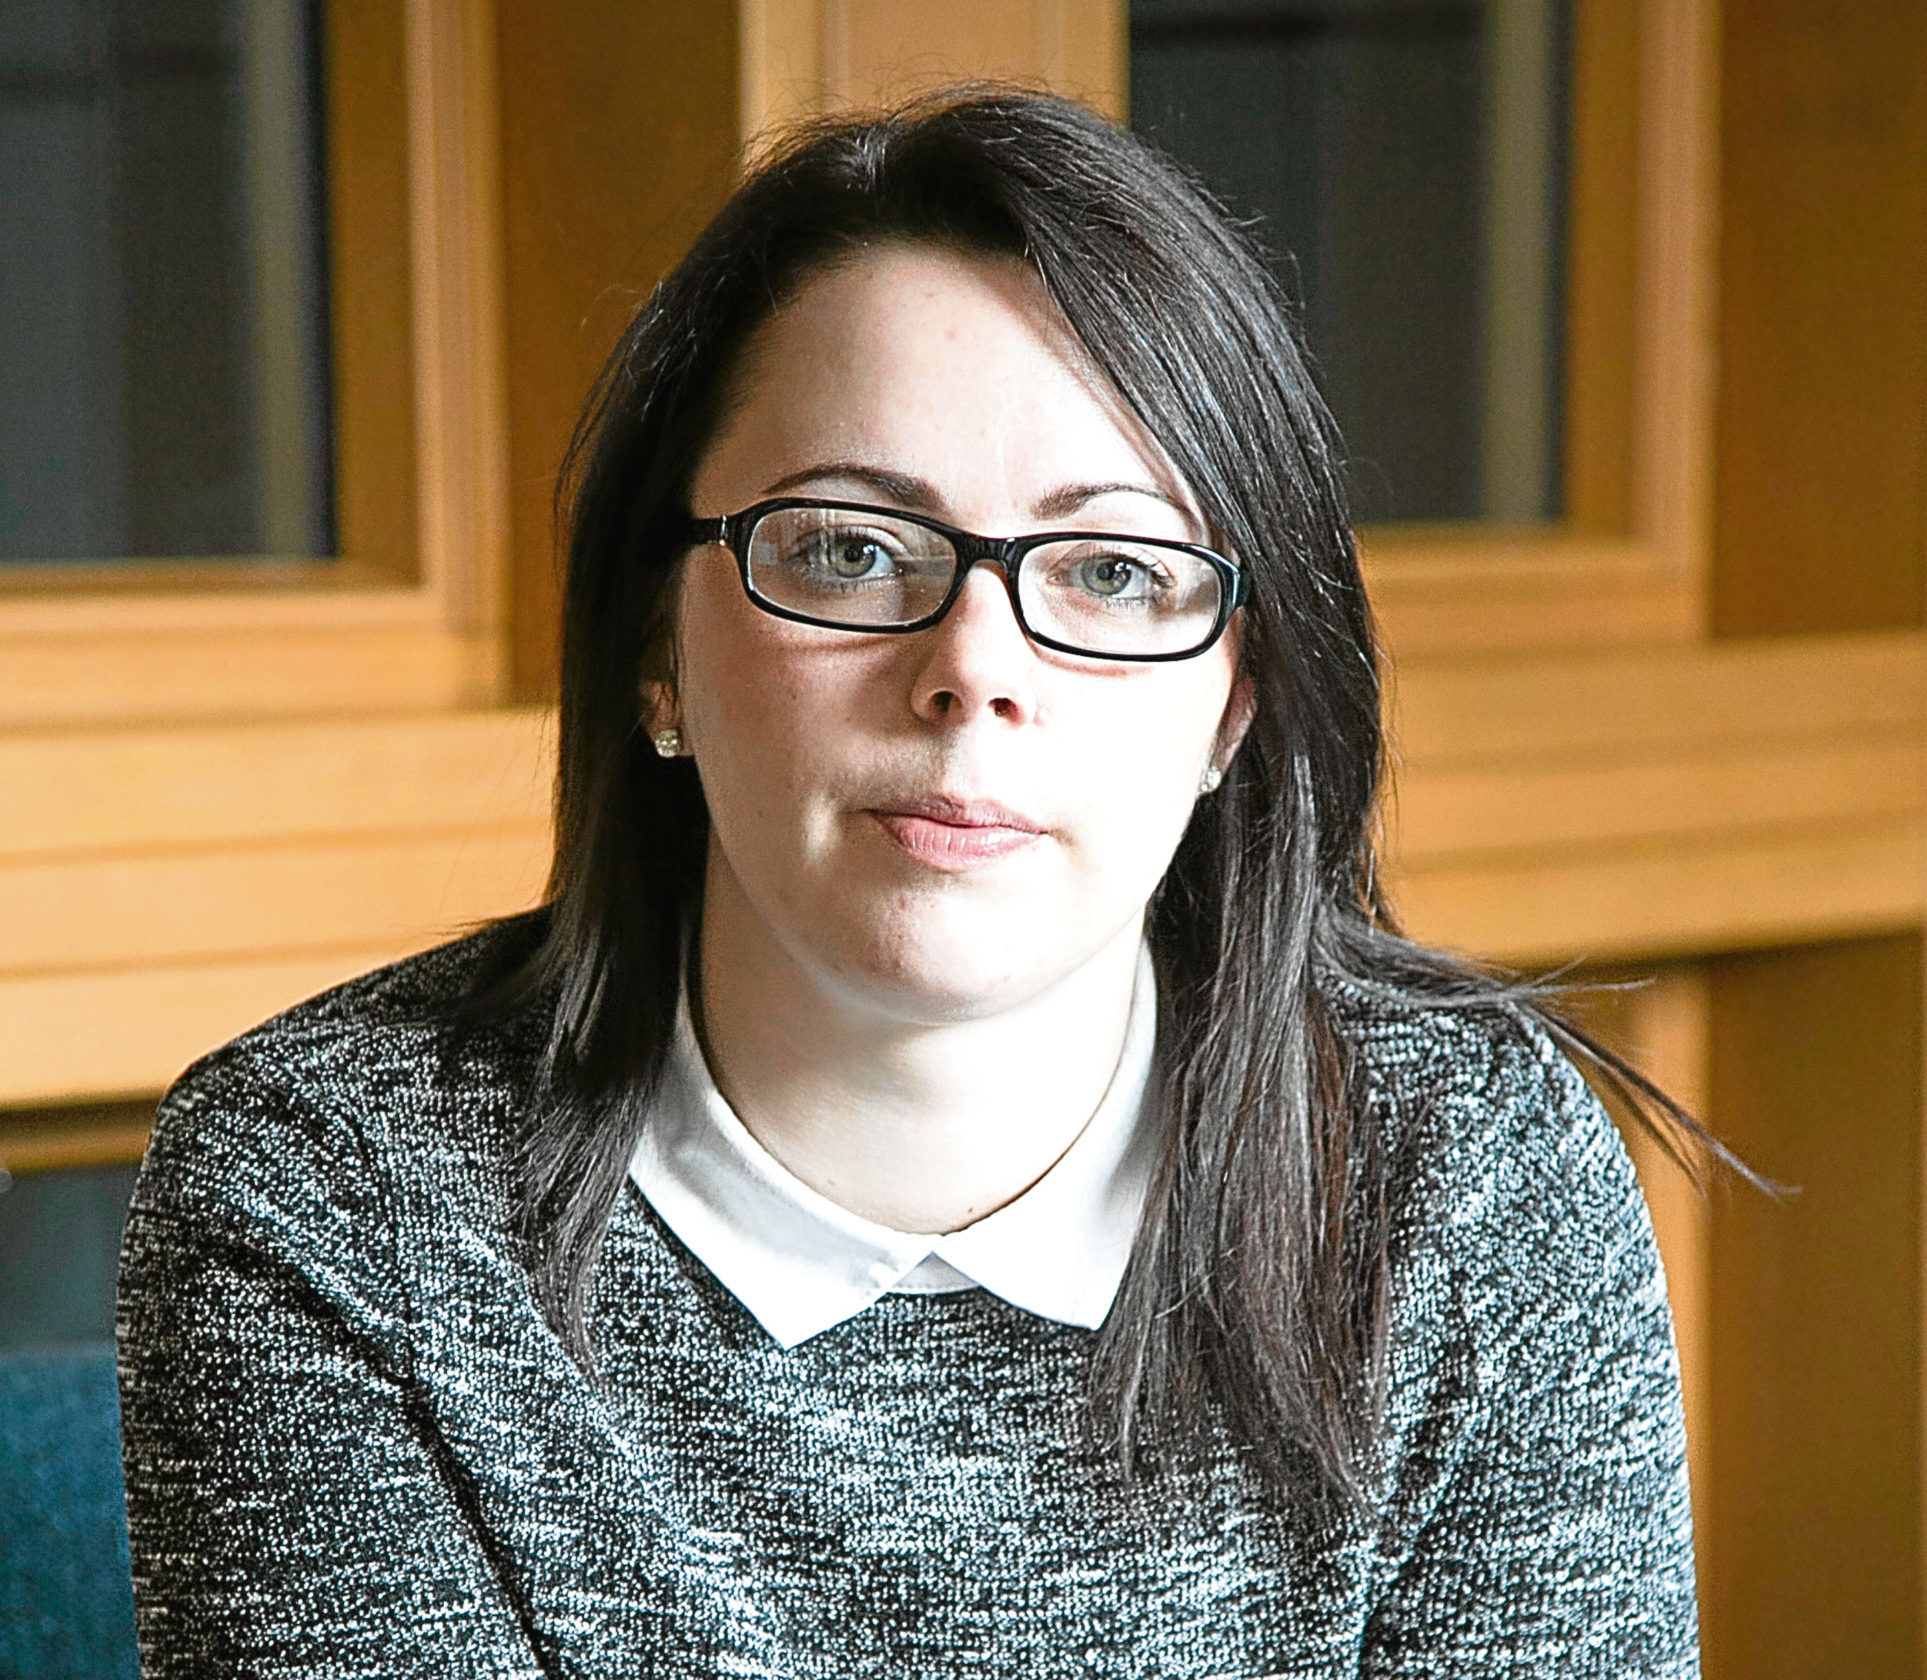 Ashley Cameron, a researcher at the Scottish Parliament, a case study on children who grew up in care (Alistair Linford)